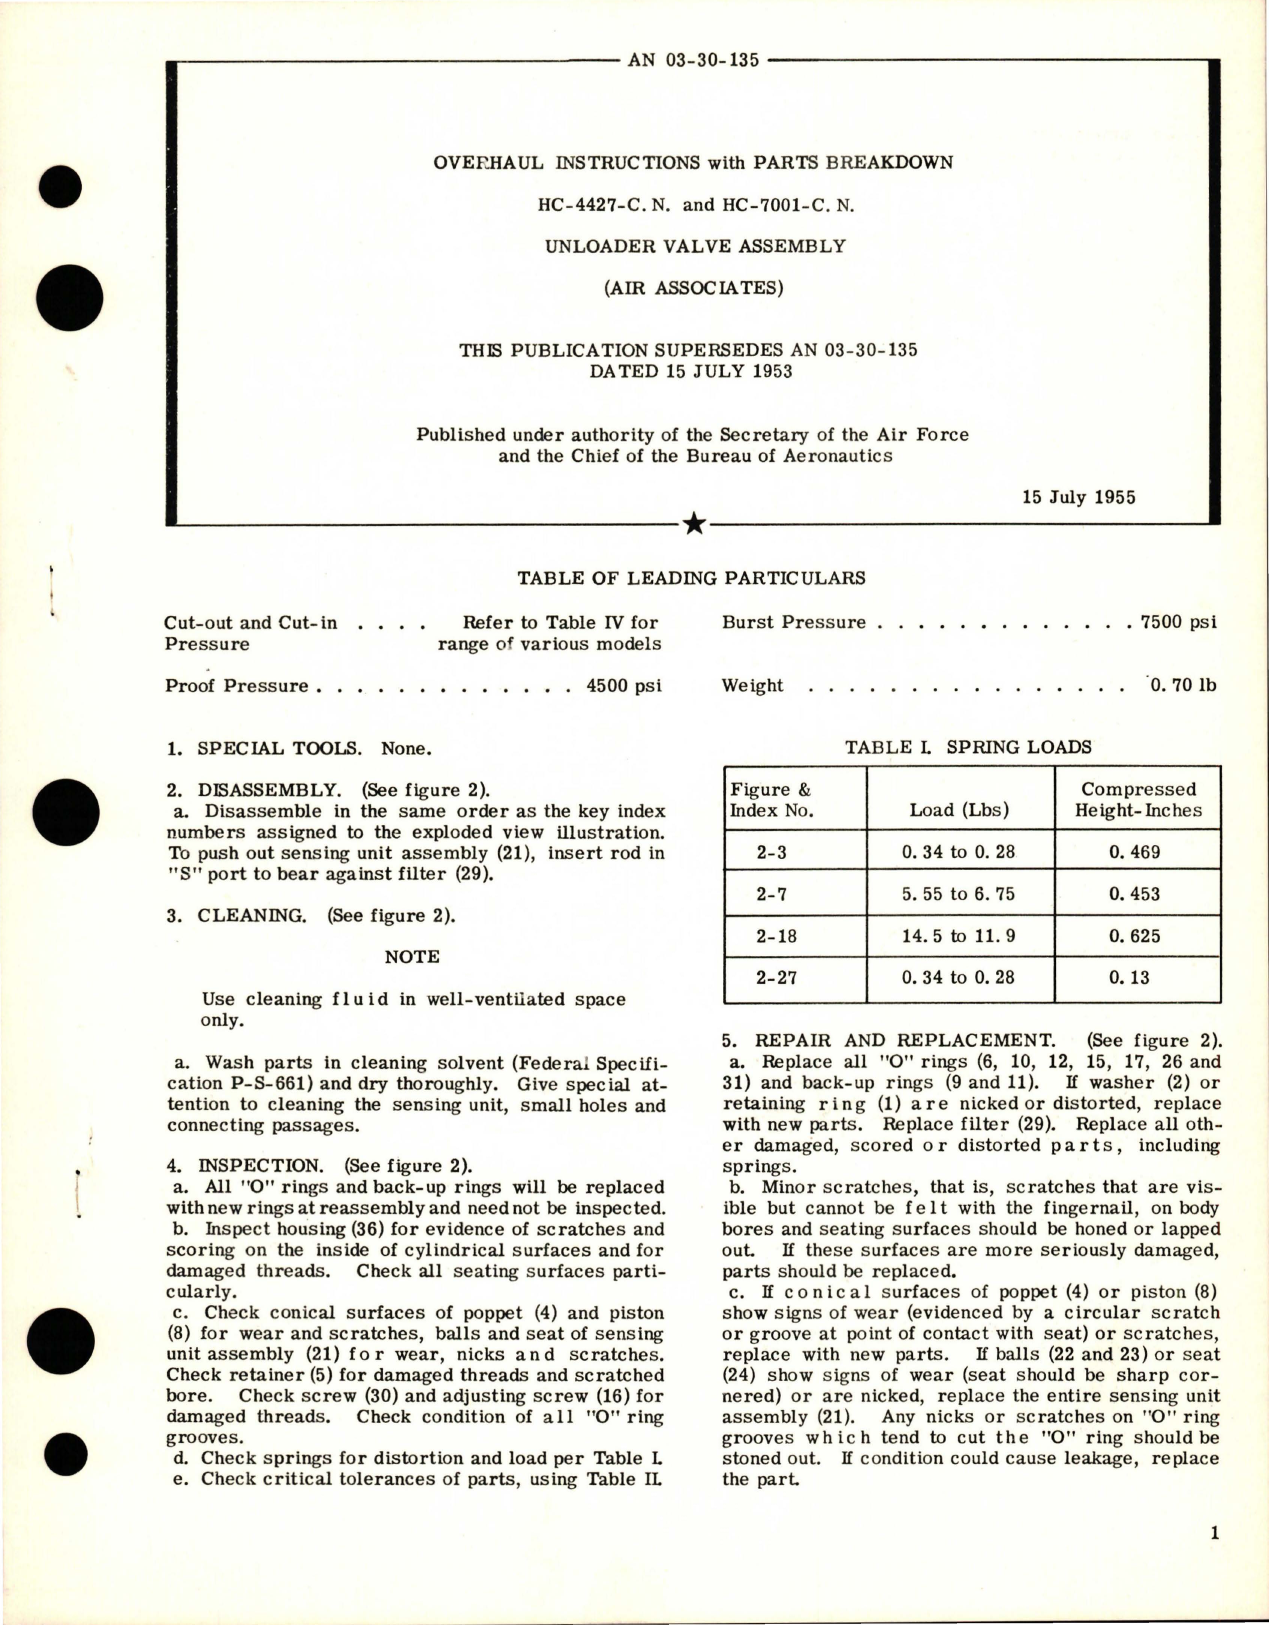 Sample page 1 from AirCorps Library document: Overhaul Instructions with Parts Breakdown for Unloader Valve Assembly - HC-4427-C.N. and HC-7001-C.N.